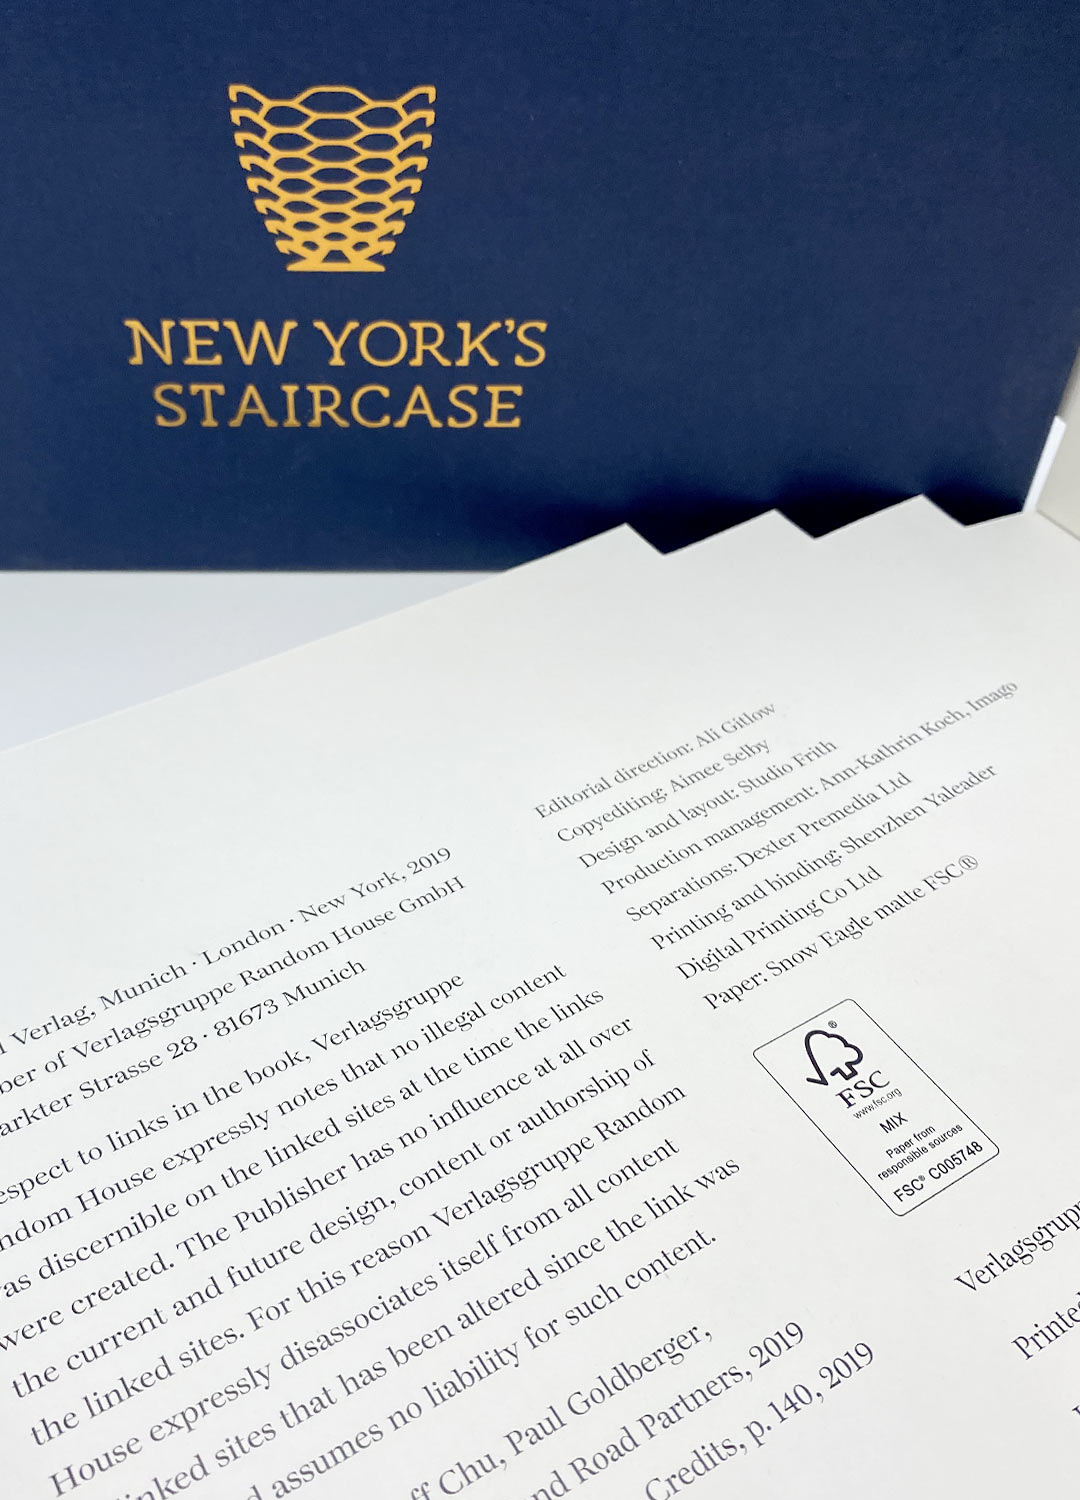 Imago FSC certified paper mark on new york staircase book